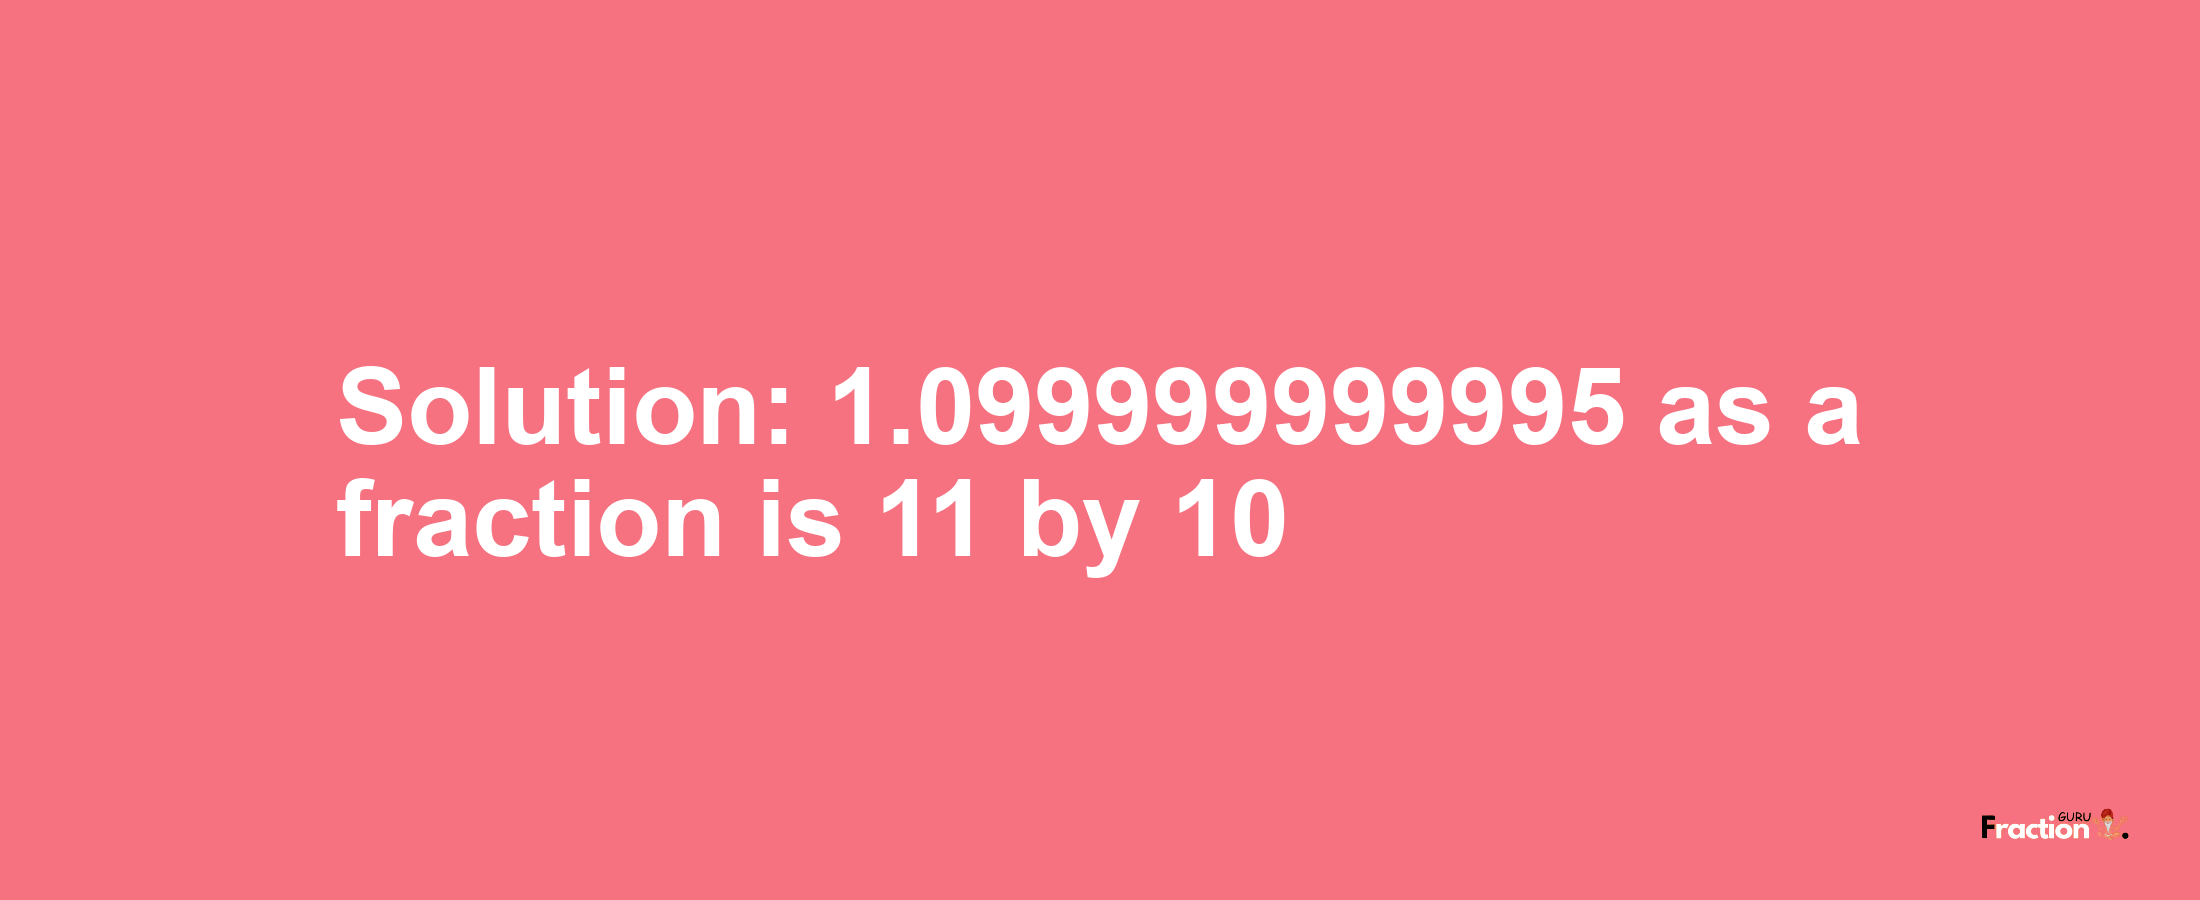 Solution:1.099999999995 as a fraction is 11/10